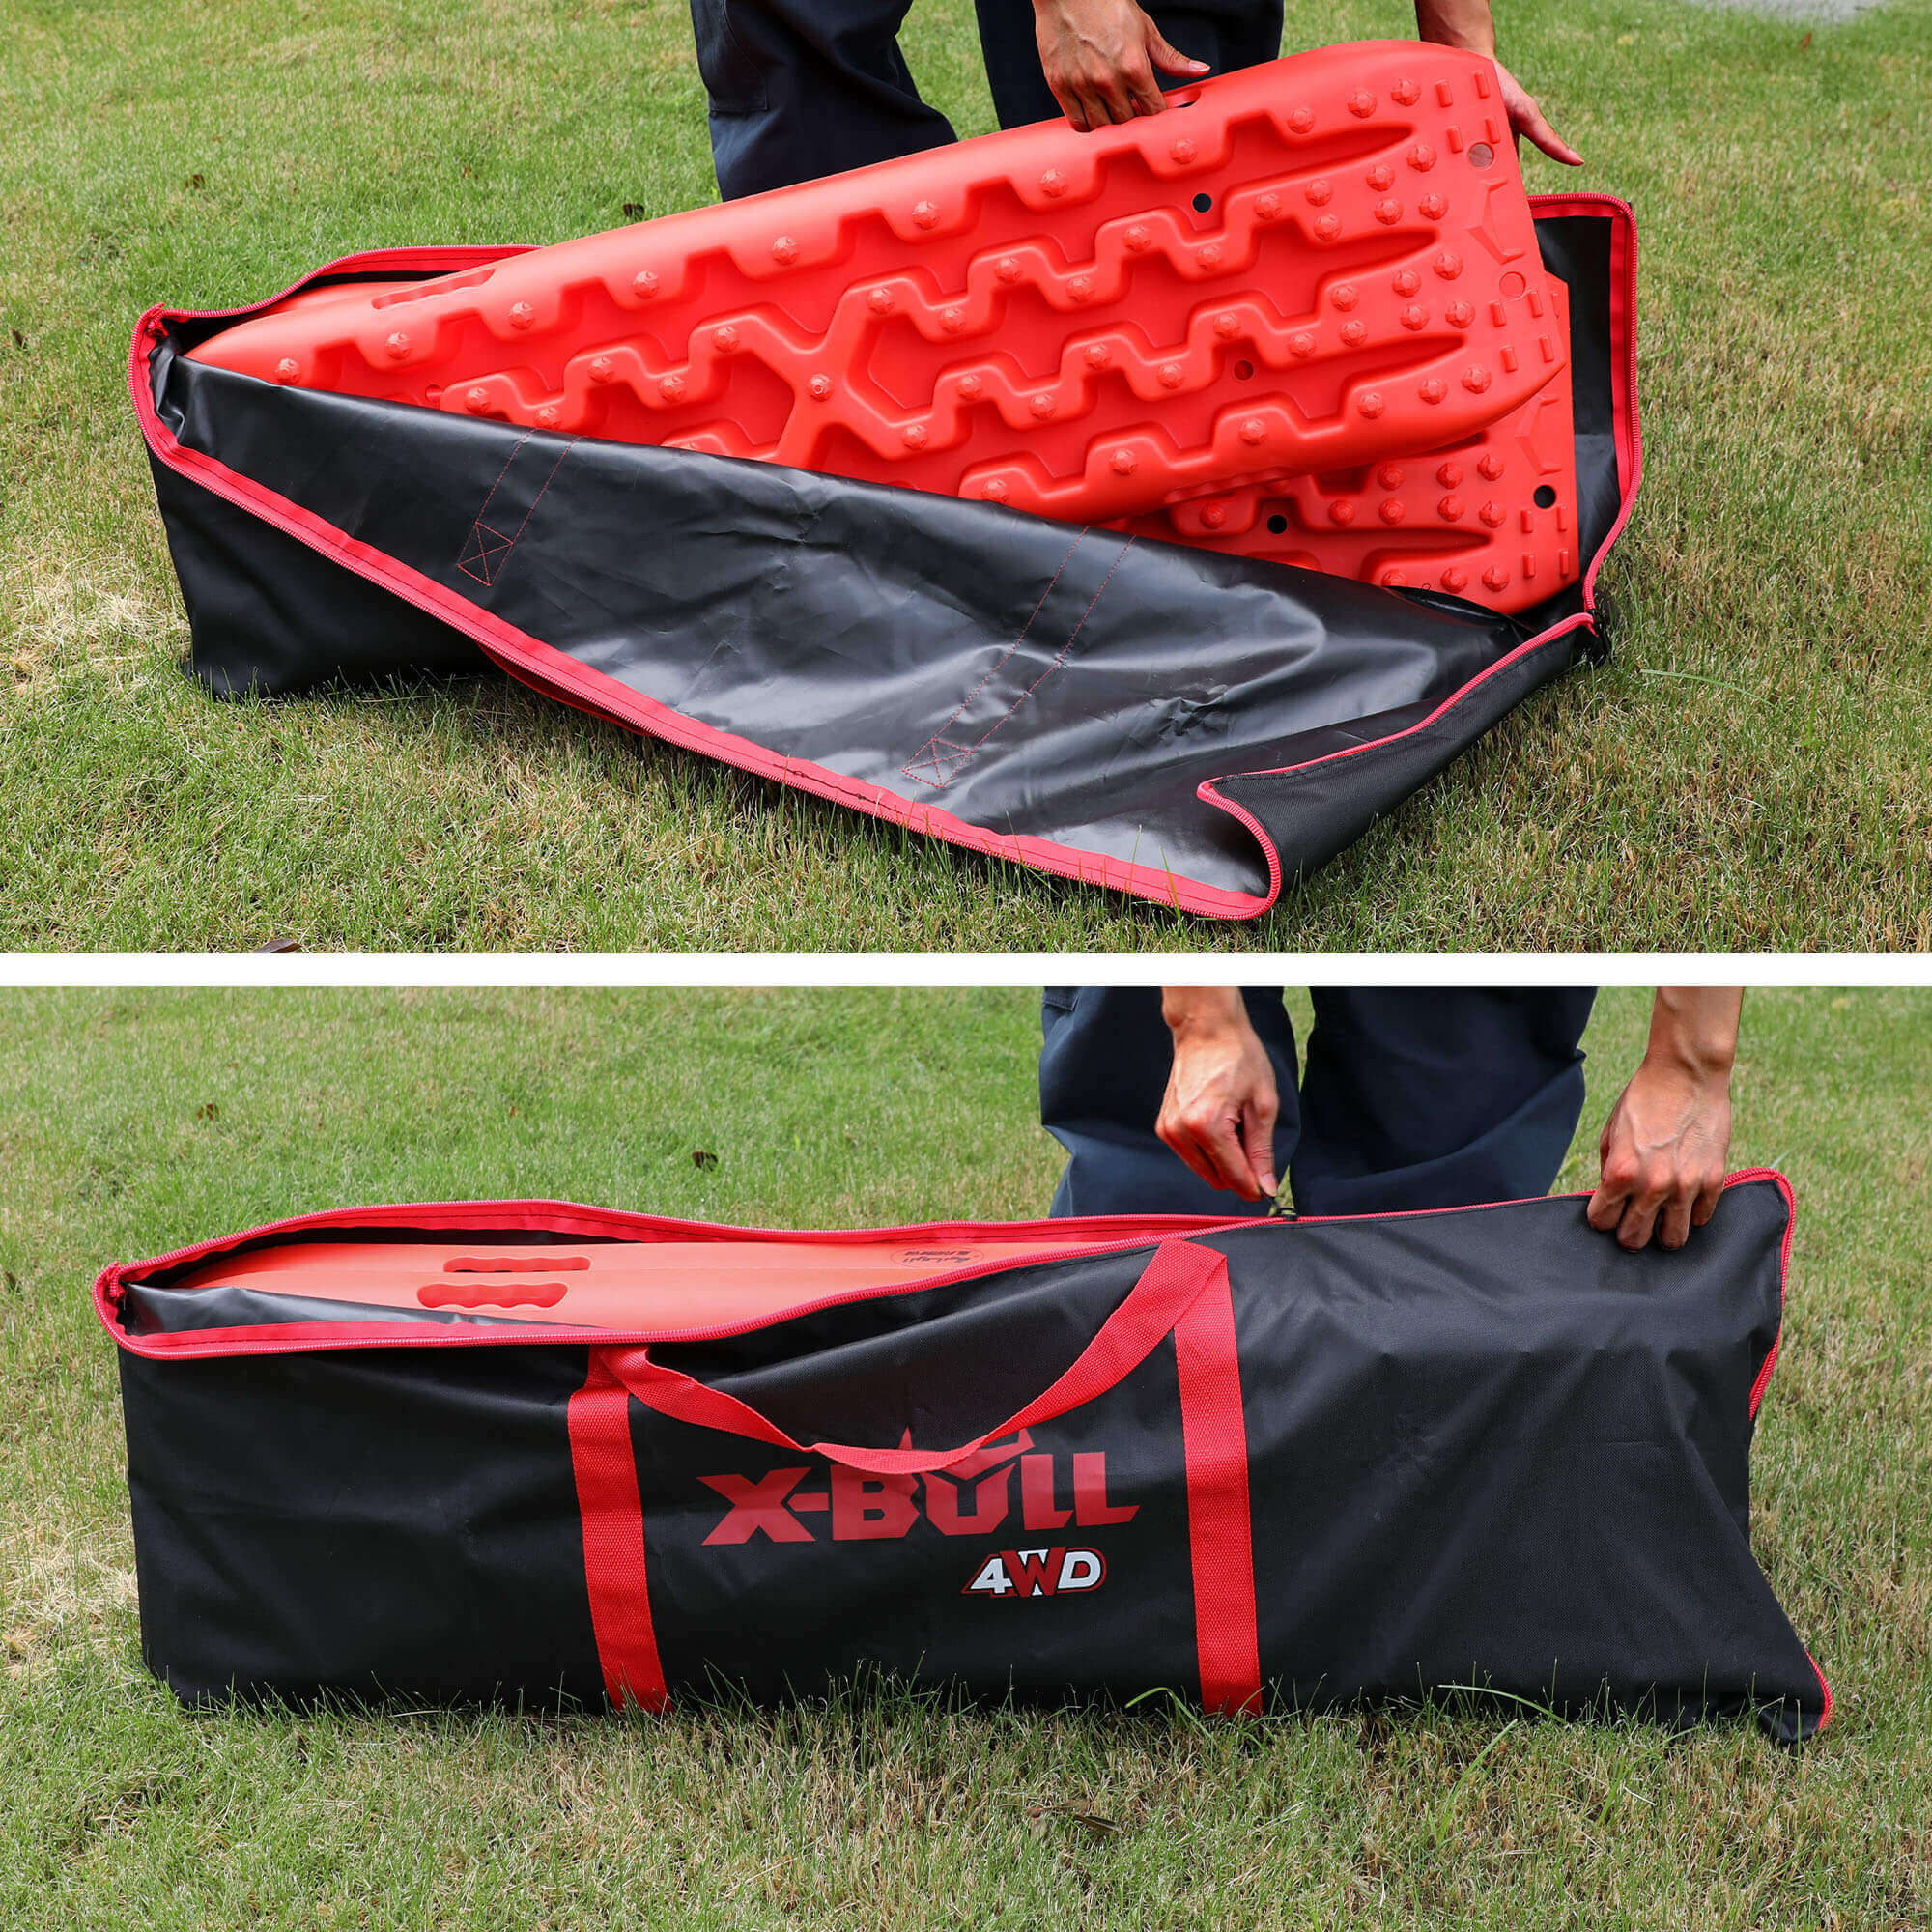 Heavy-Duty 4x4 Recovery Tracks Carry Bag with Zippers - X-BULL